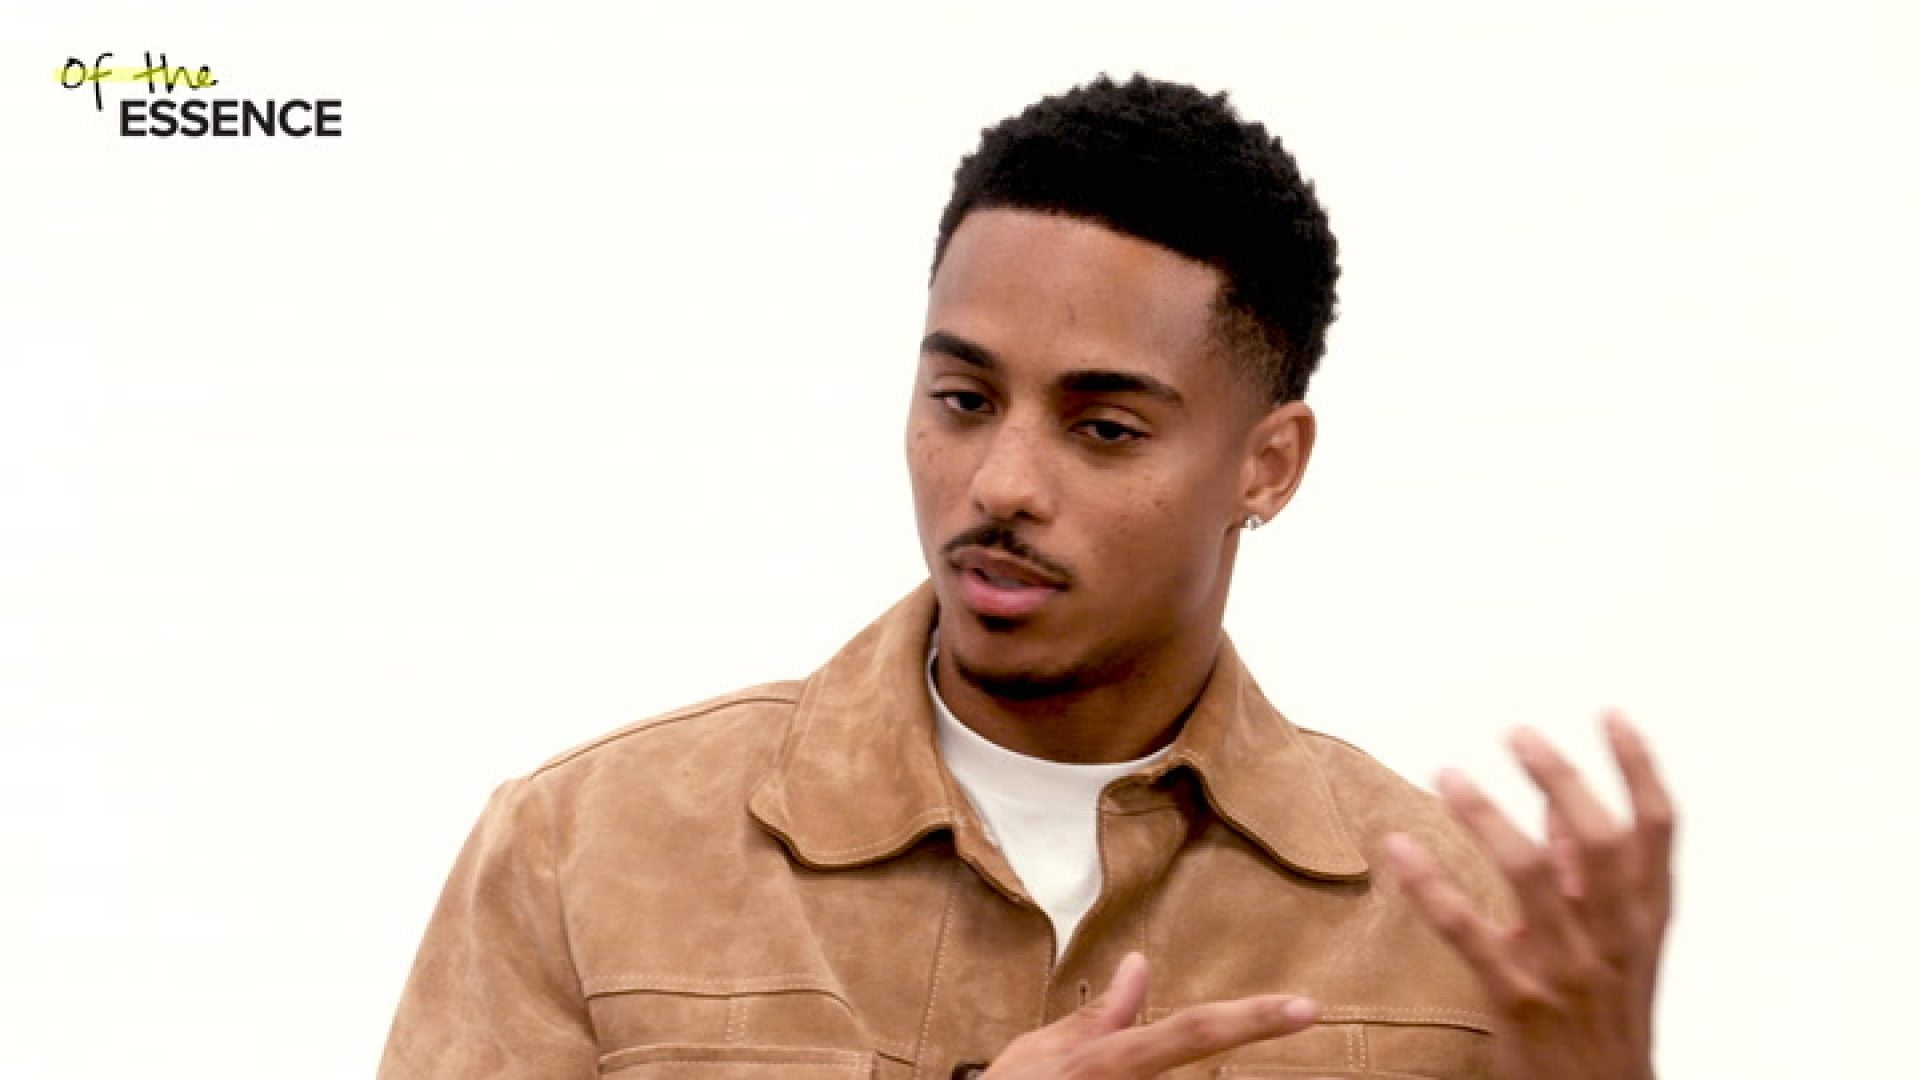 WATCH: Keith Powers Speaks On Working With Gabrielle Union